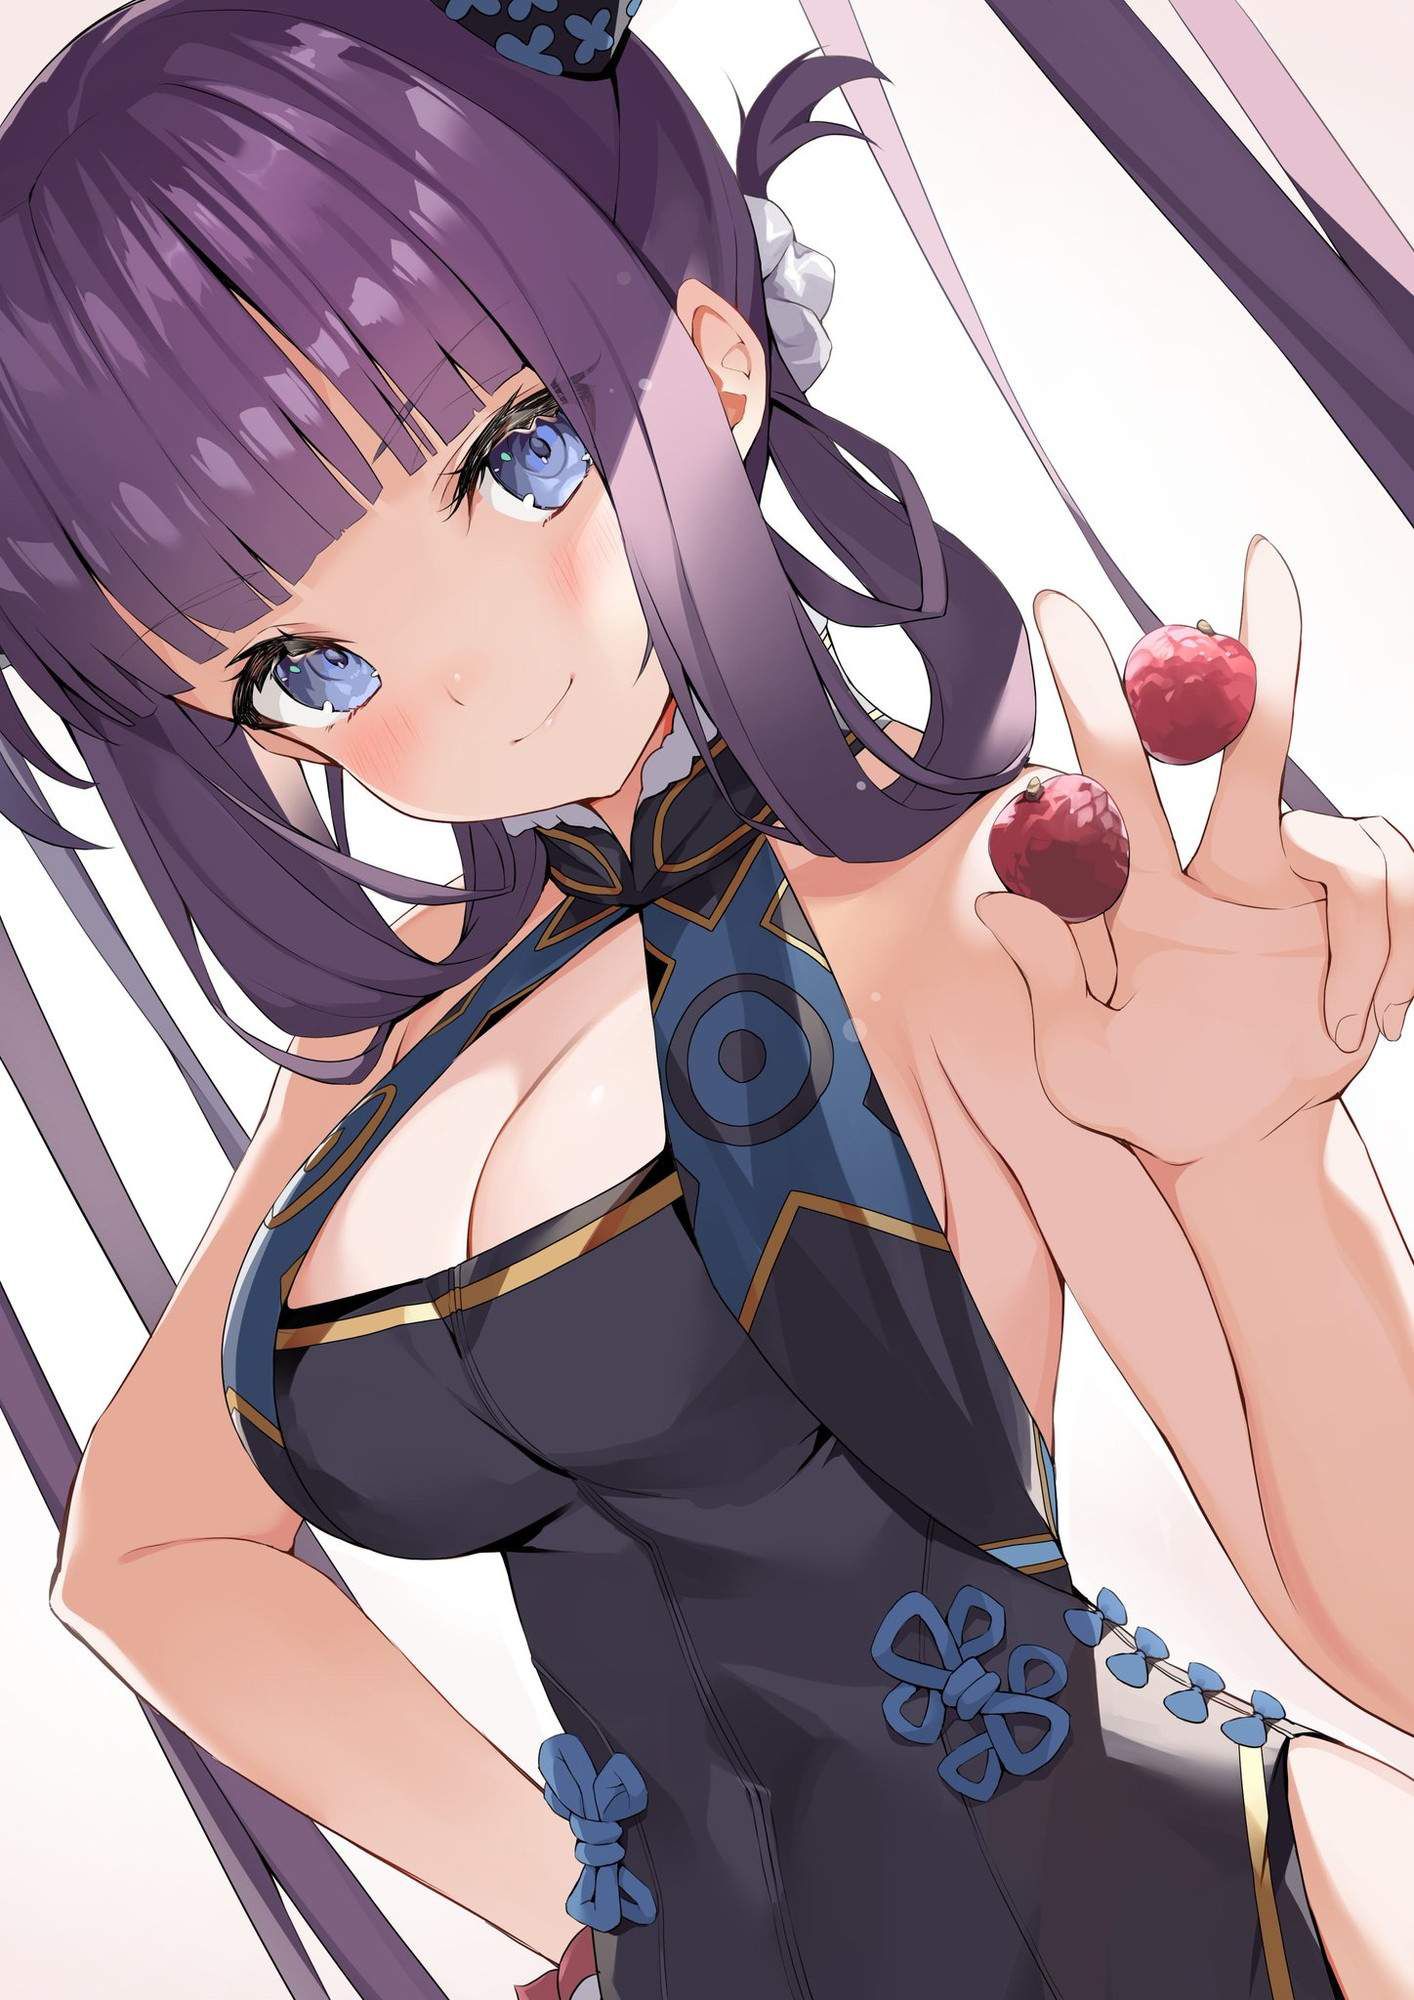 Fate Grand Order: A cute erotica image summary that pulls out of Yang Guifei's echi 9